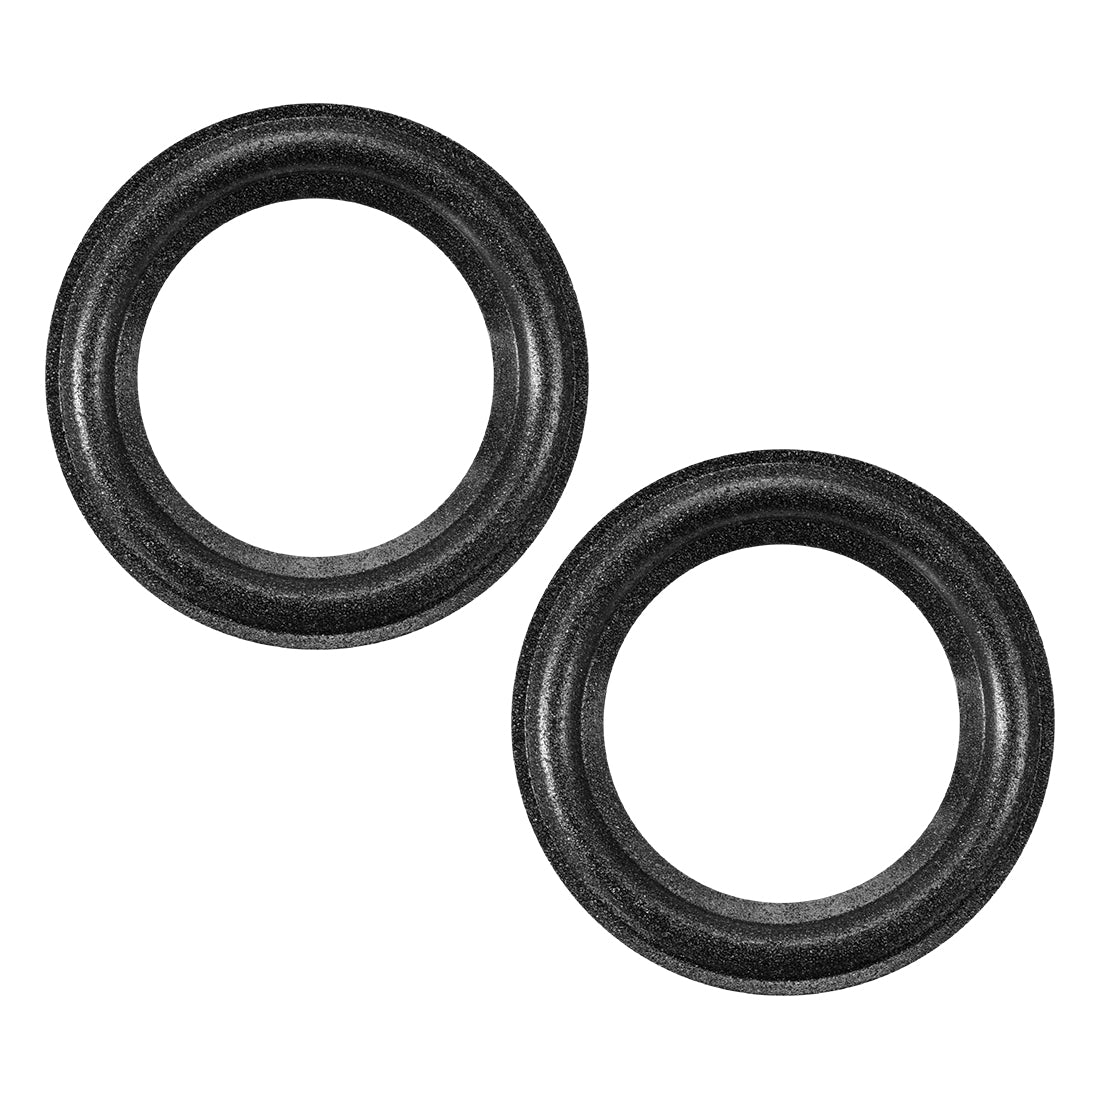 uxcell Uxcell 2"  2 inches Speaker Foam Edge Surround Rings Replacement Parts for Speaker Repair or DIY 2pcs